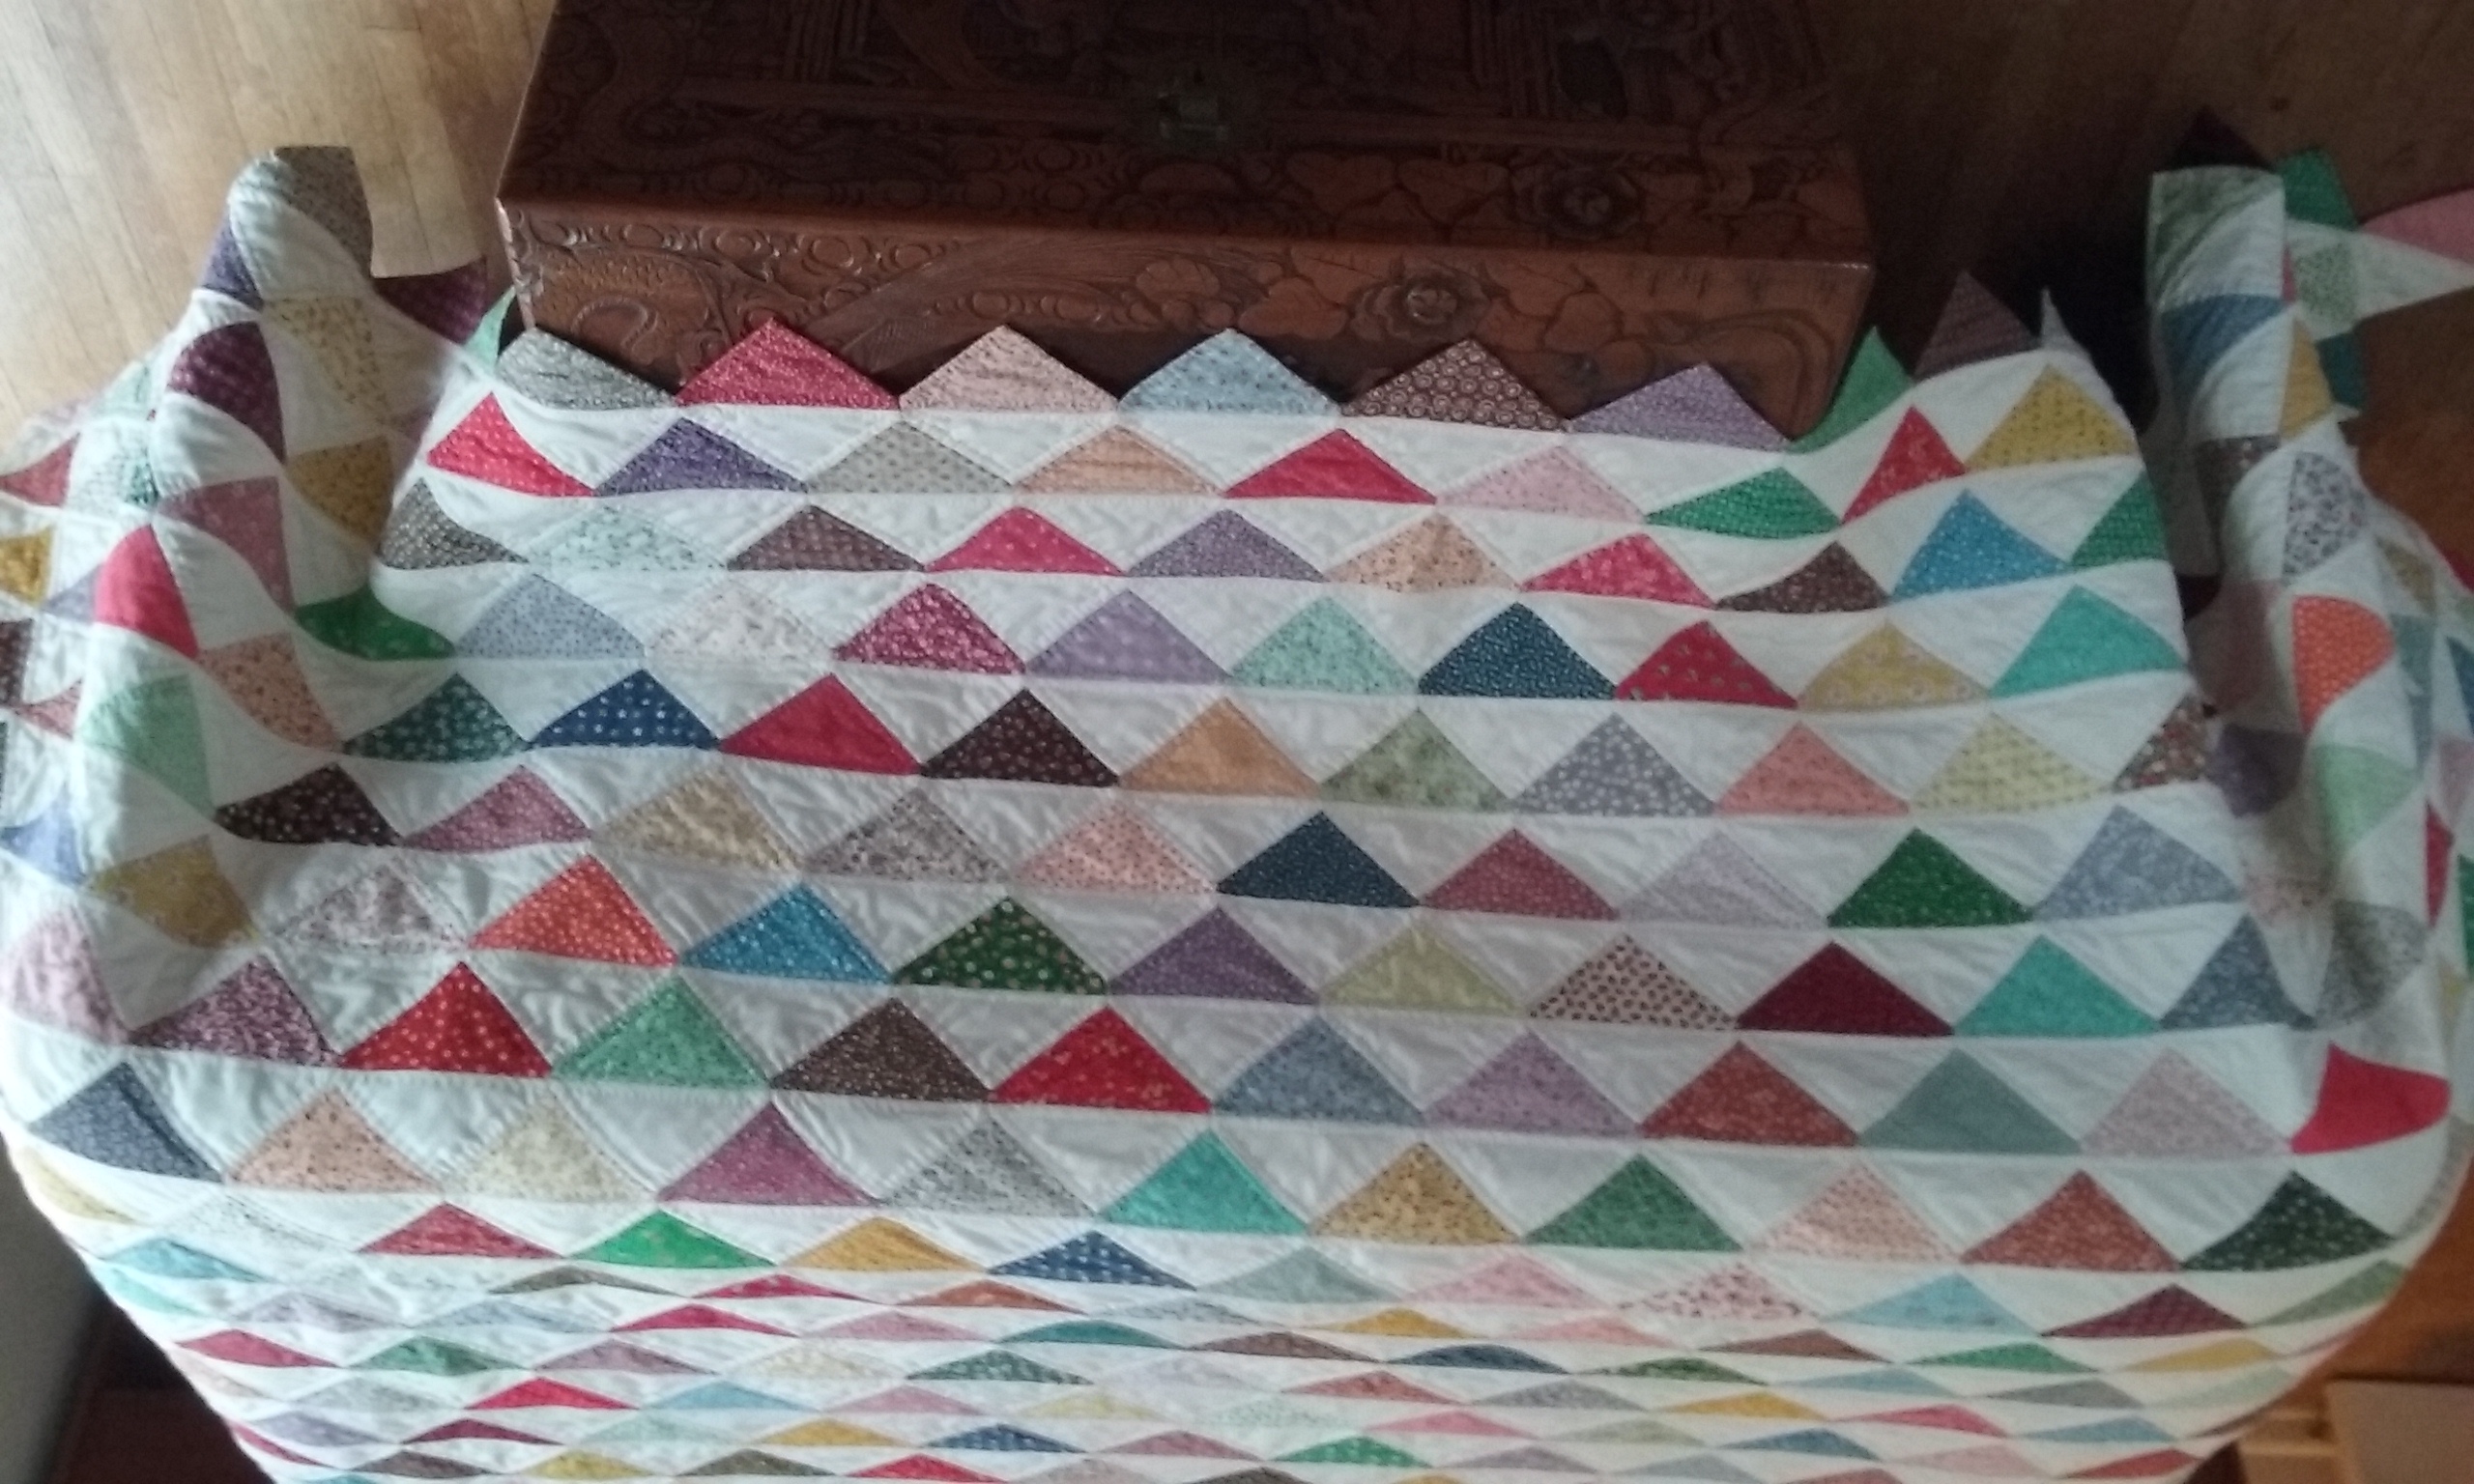 Can you Help identify quilt pattern and possible age?